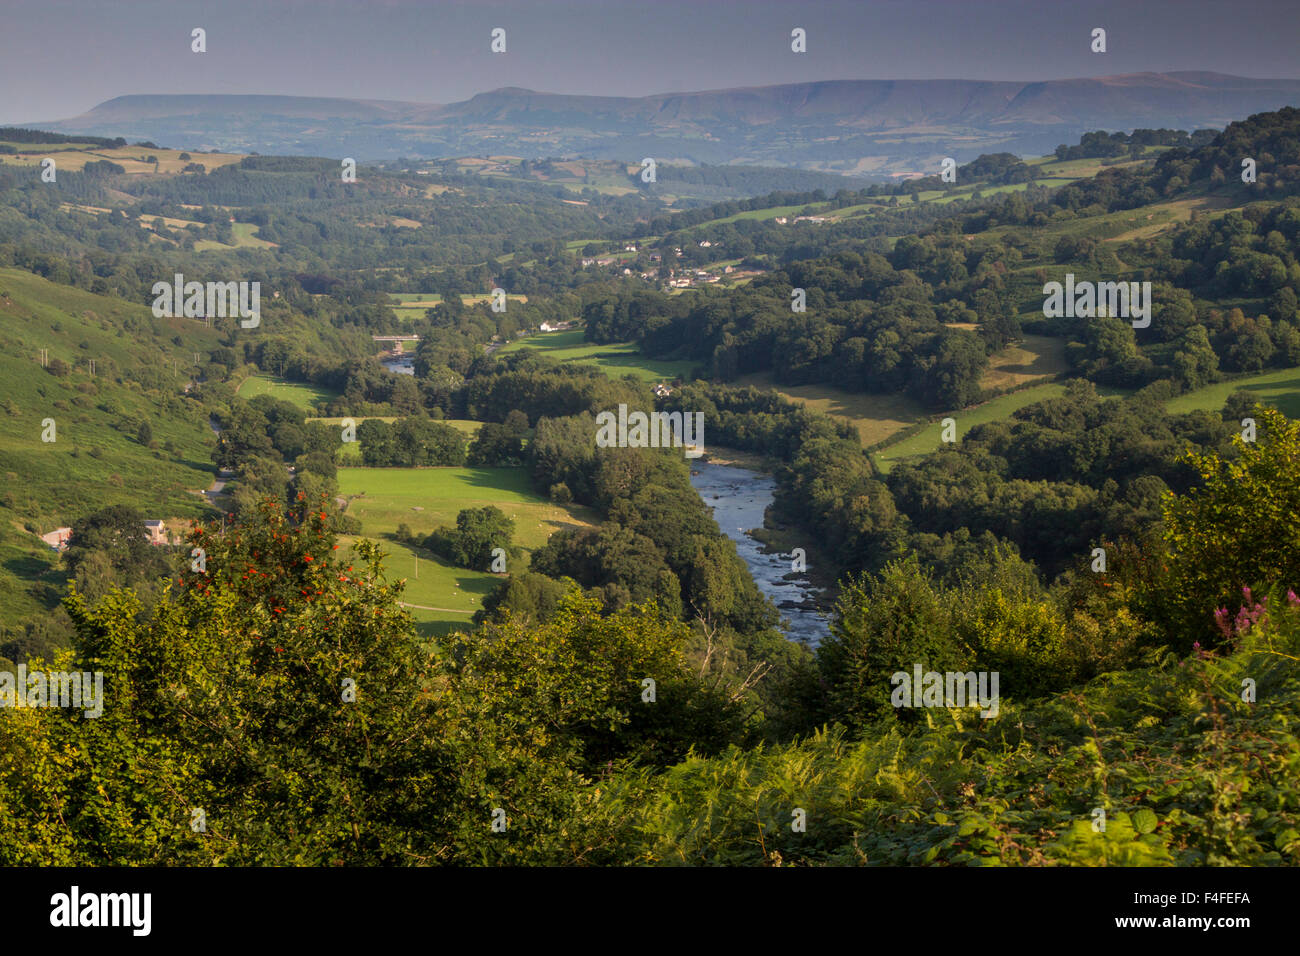 Upper Wye Valley near Builth Wells looking south to Black Mountains range Brecon Beacons Powys Mid Wales UK Stock Photo